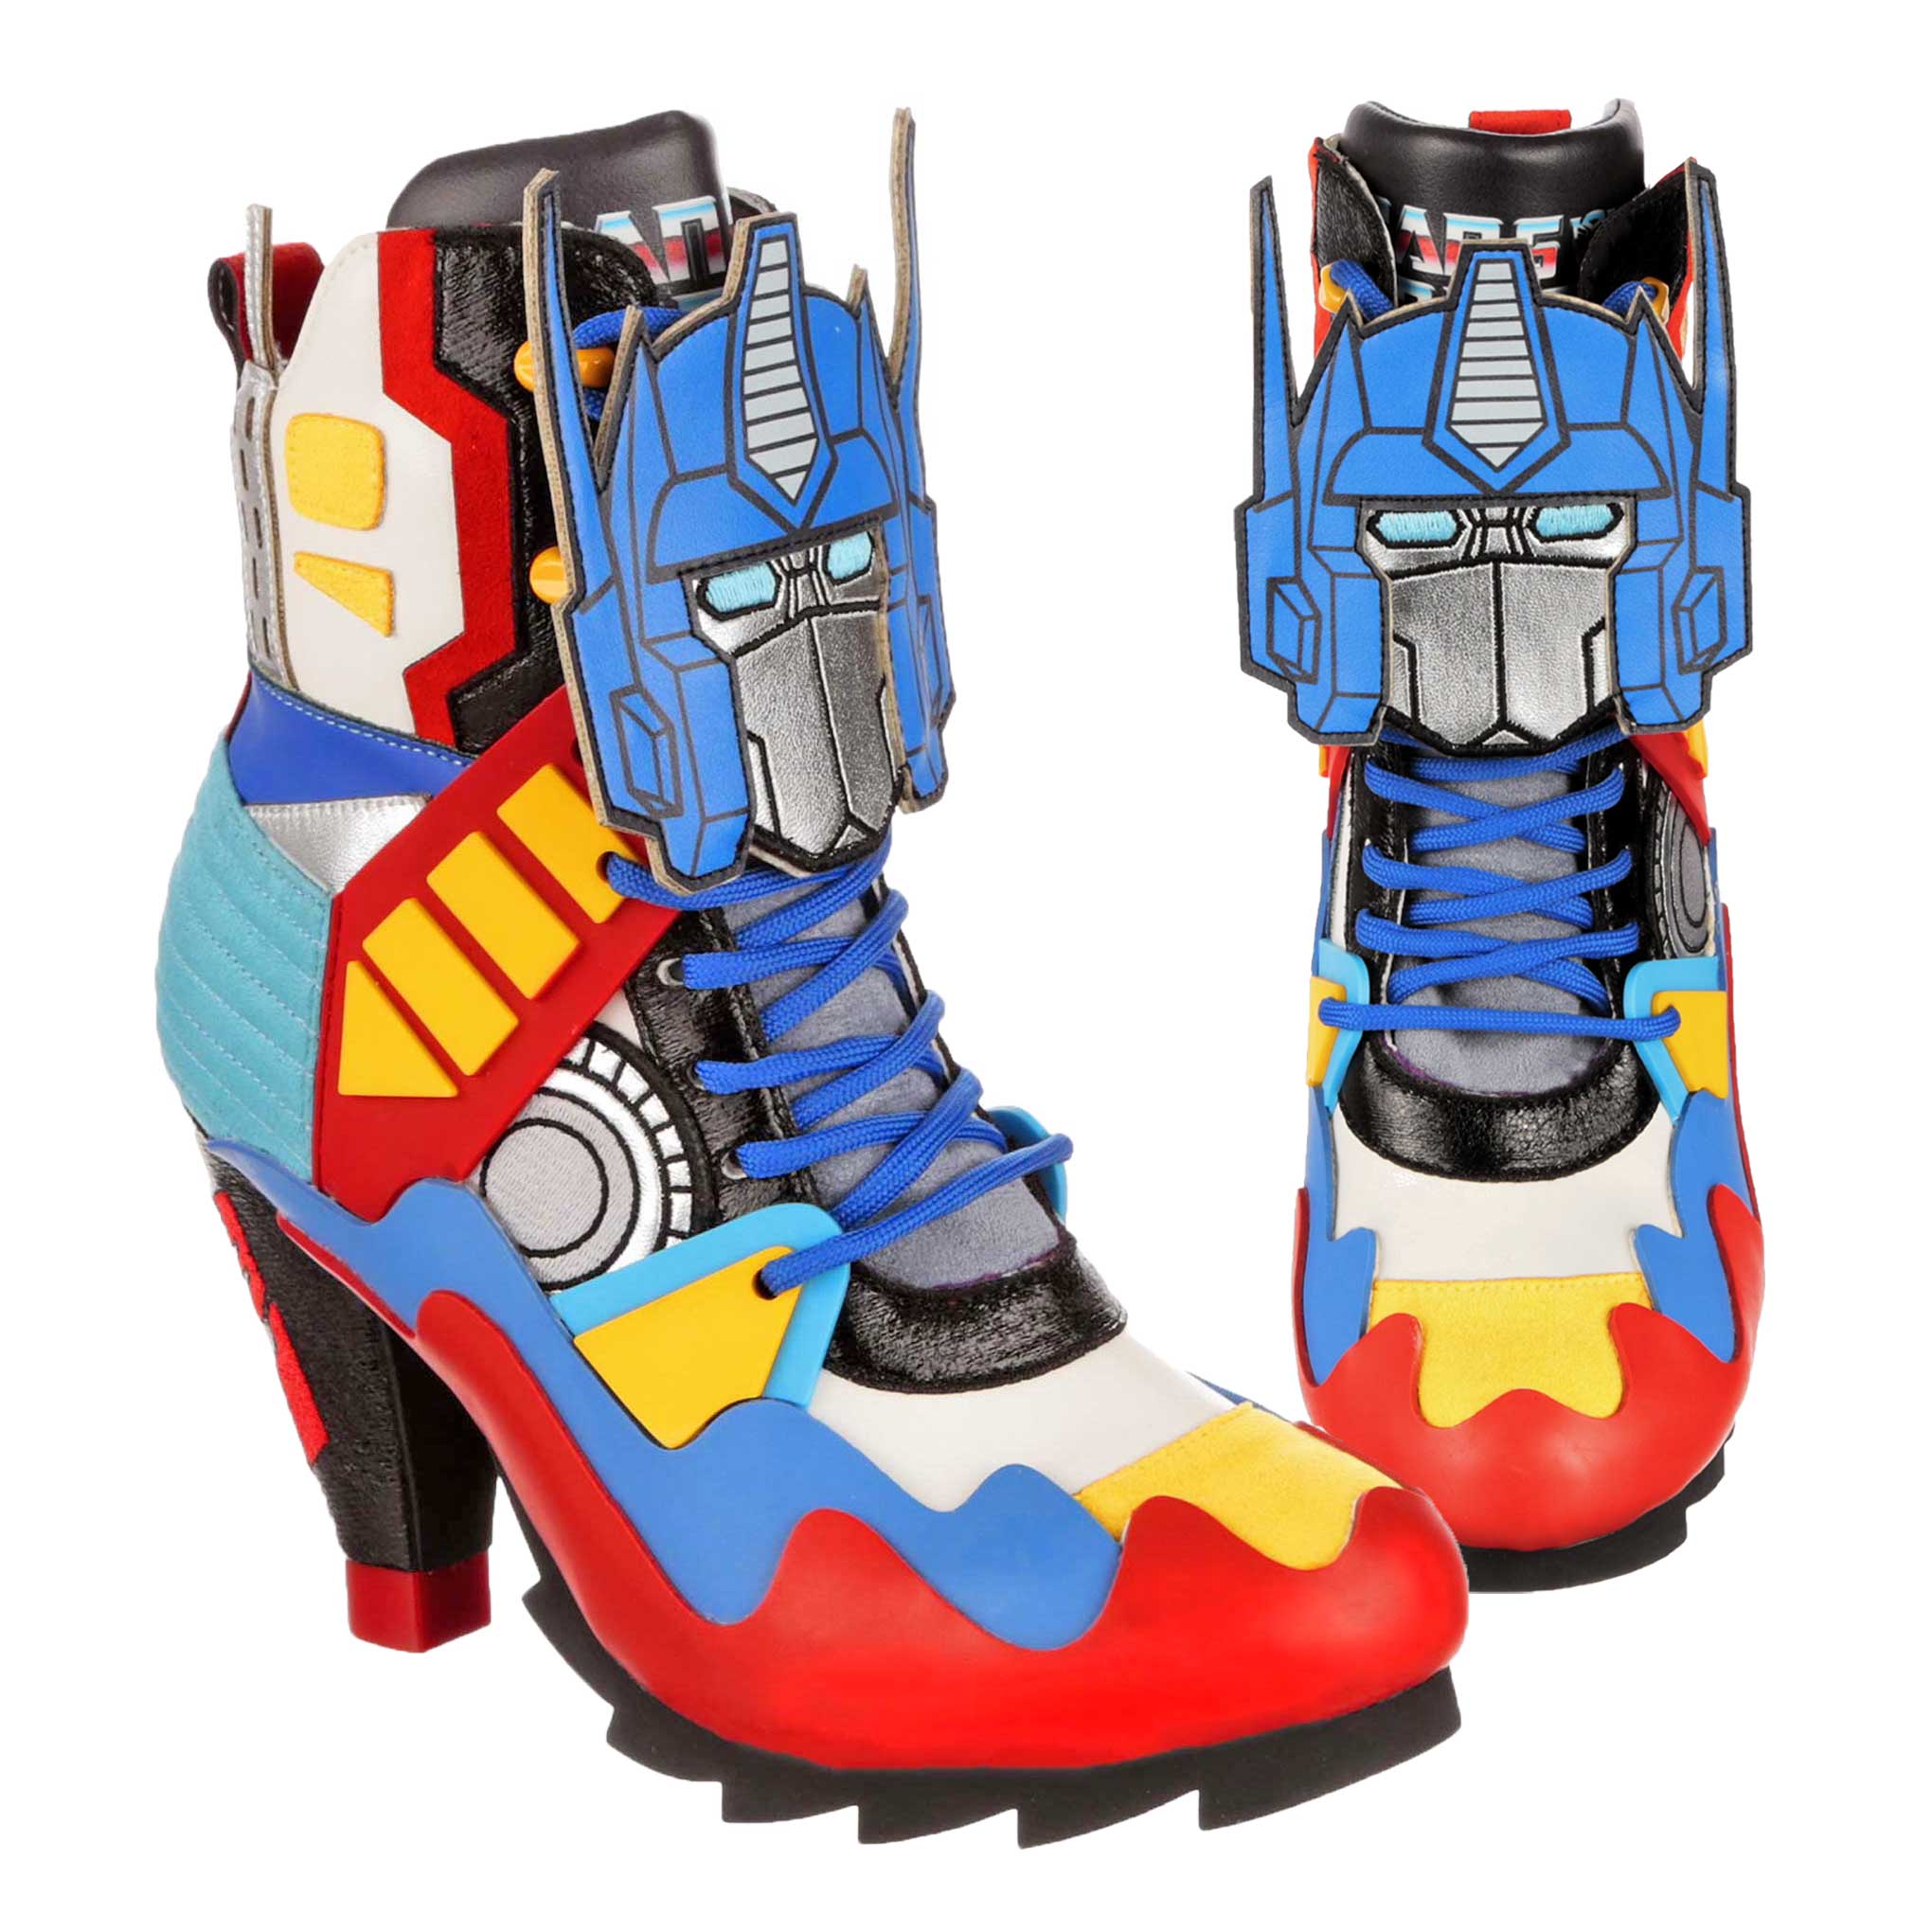 A pair of multicoloured Transformers-themed sporty style high heeled boots. Blue, red, yellow and white geometric shapes make up most of these ankle boots with a chunky black platform and high heel. Blue laces lace up the heeled boot with a large Optimus Prime decal sitting on the laces.  A black tongue is poking out the top with the Transformers logo showing partially.   